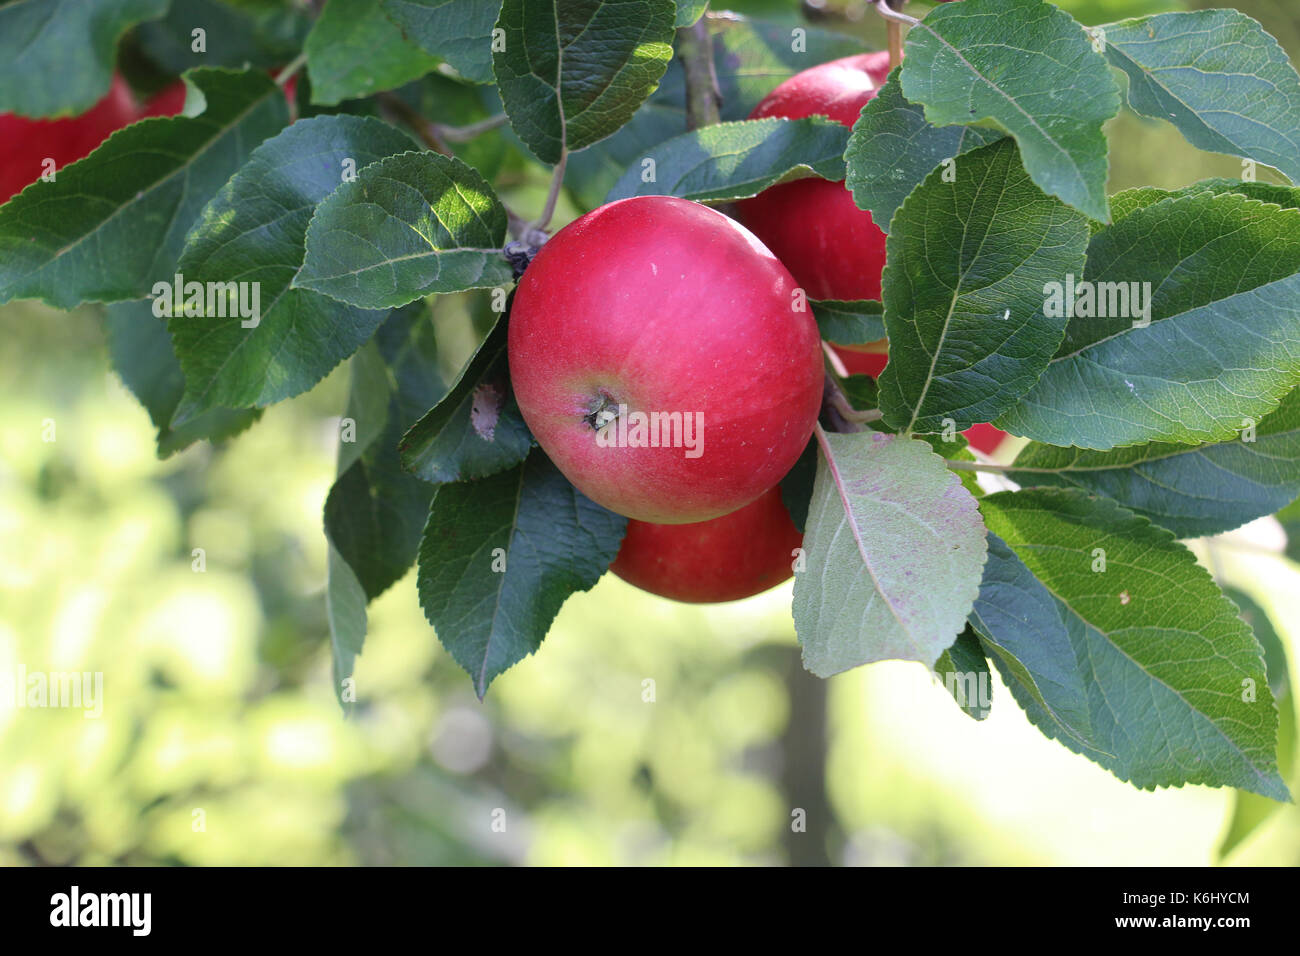 Red Discovery Apple fruits, Malus domestica, hanging on the branch of an apple tree in late summer, Shropshire, England. Stock Photo